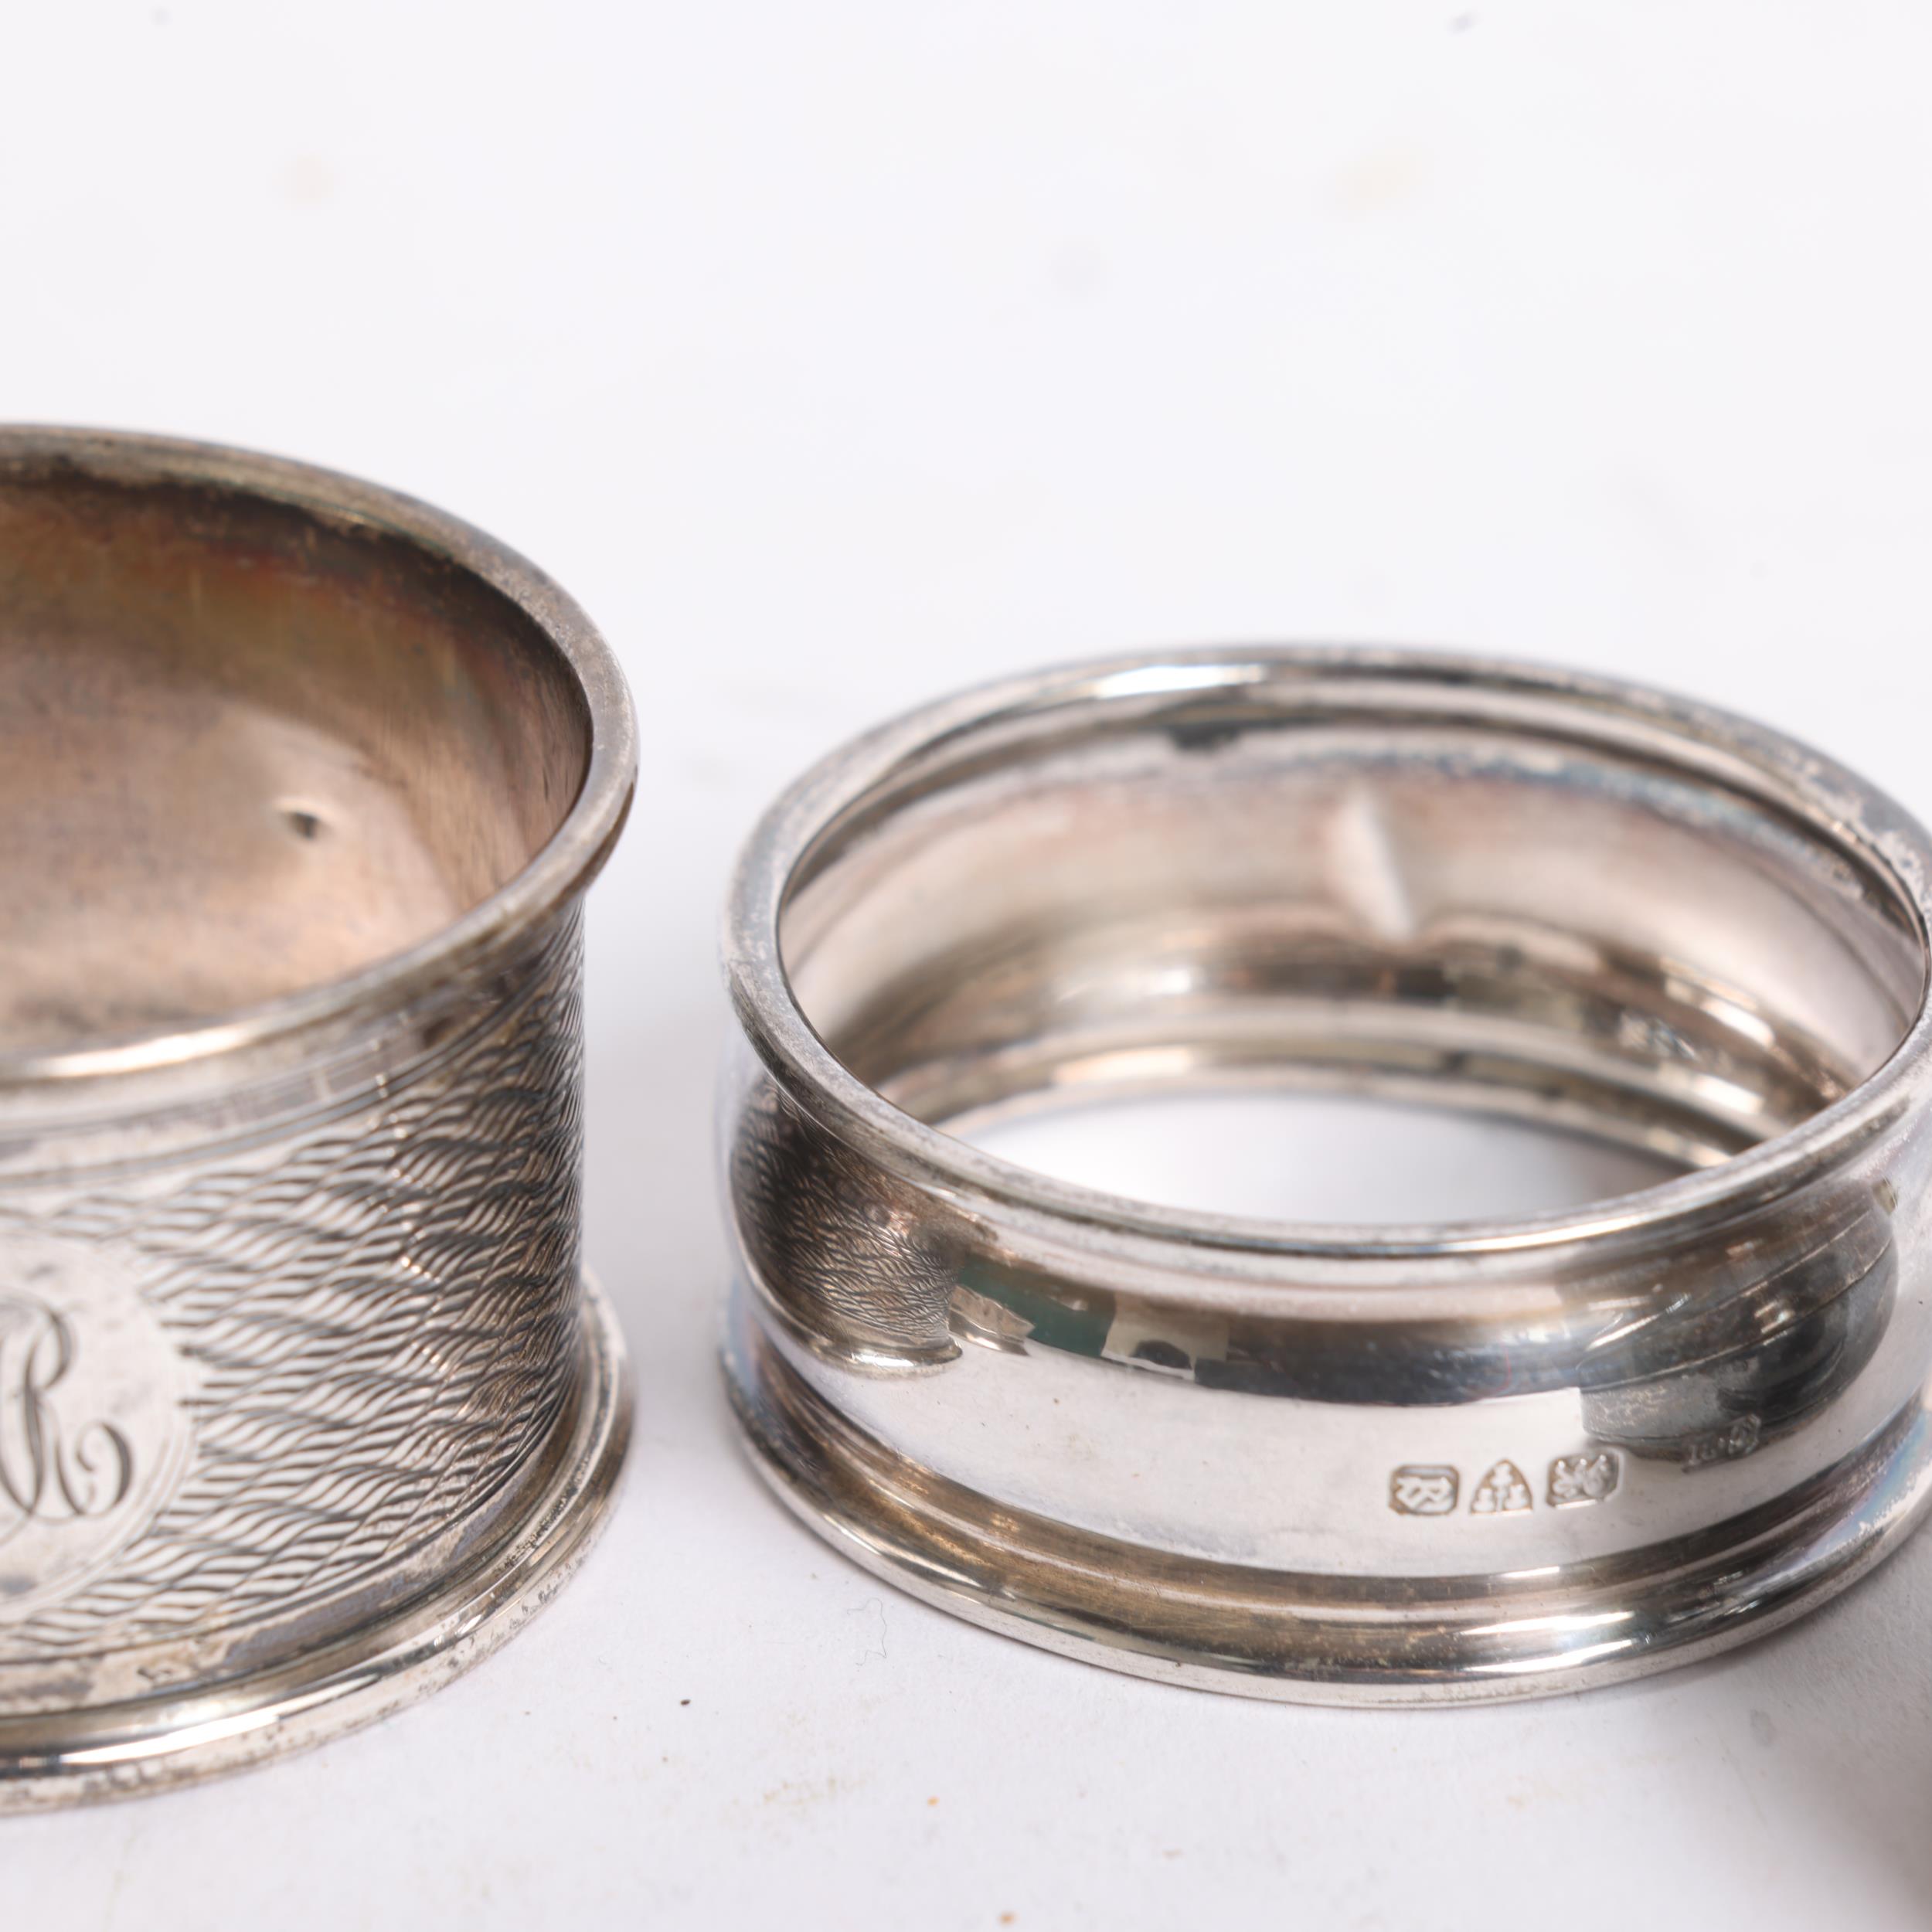 2 modern silver circular pillboxes and covers, and 2 silver napkin rings - Image 2 of 2